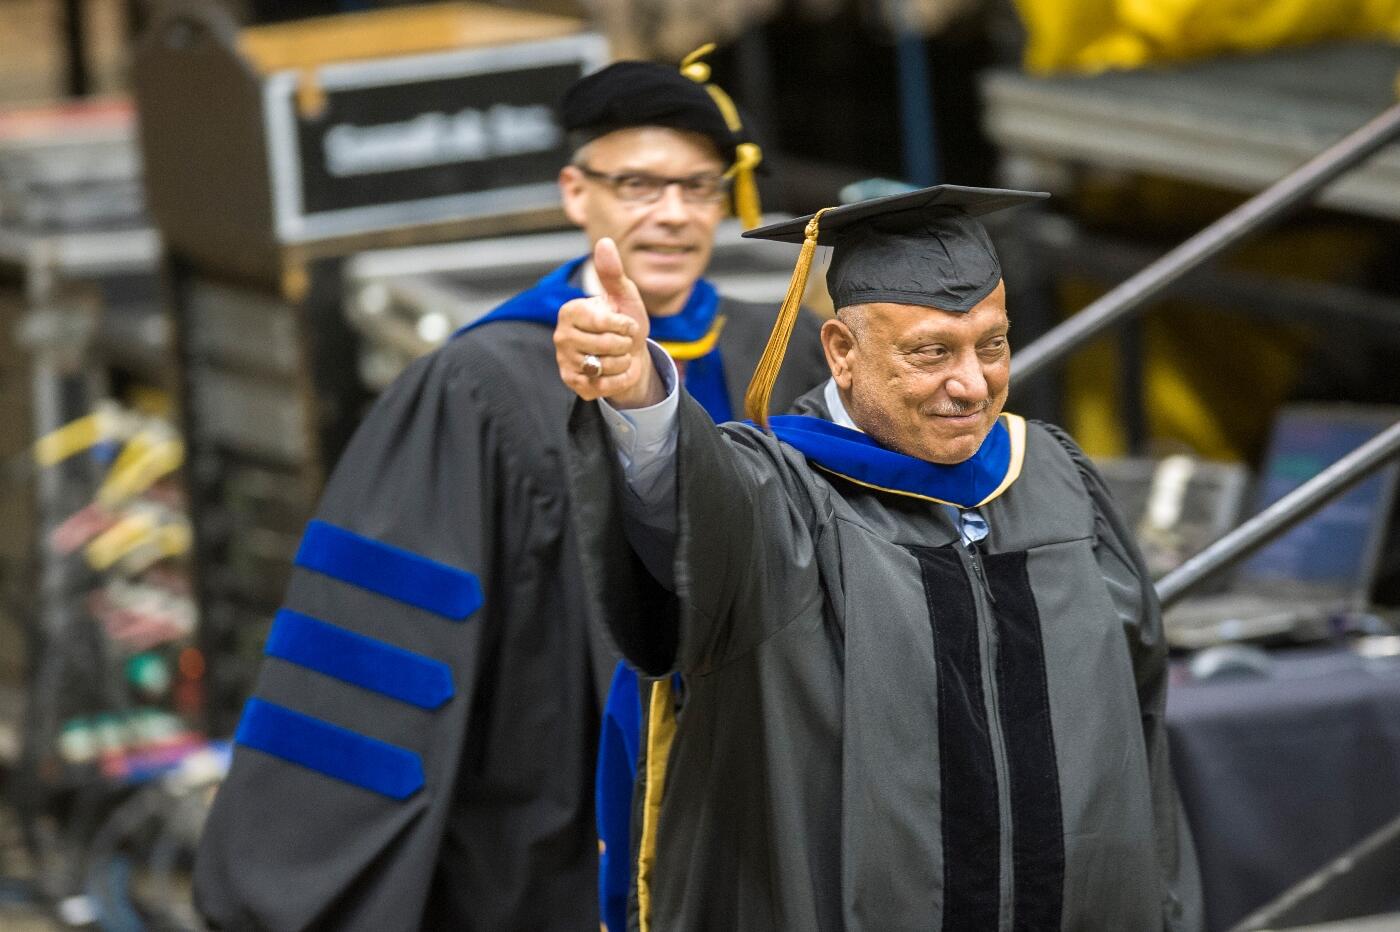 Jamal Aladajaei, Ph.D., gives a thumbs up to his family at the spring commencement ceremony.